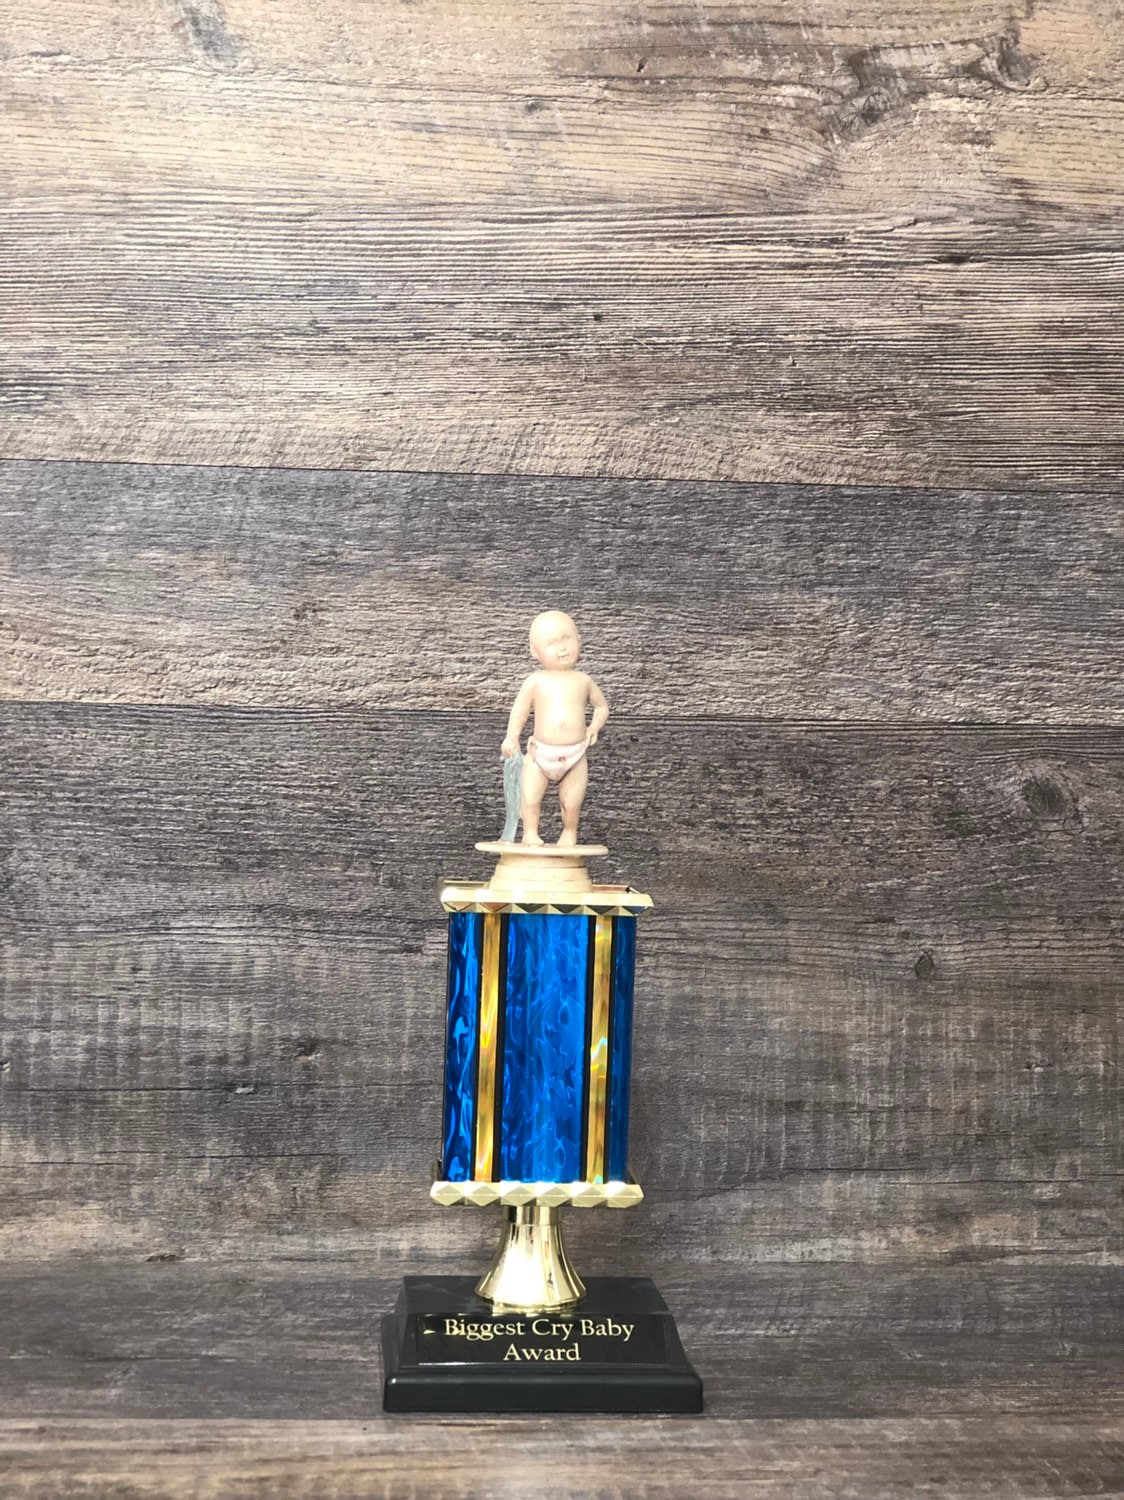 Funny Trophy Biggest Cry Baby Award Quitter Sore Loser Crybaby Fantasy Football League LOSER Trophy FFL Last Place Fantasy Funny Award